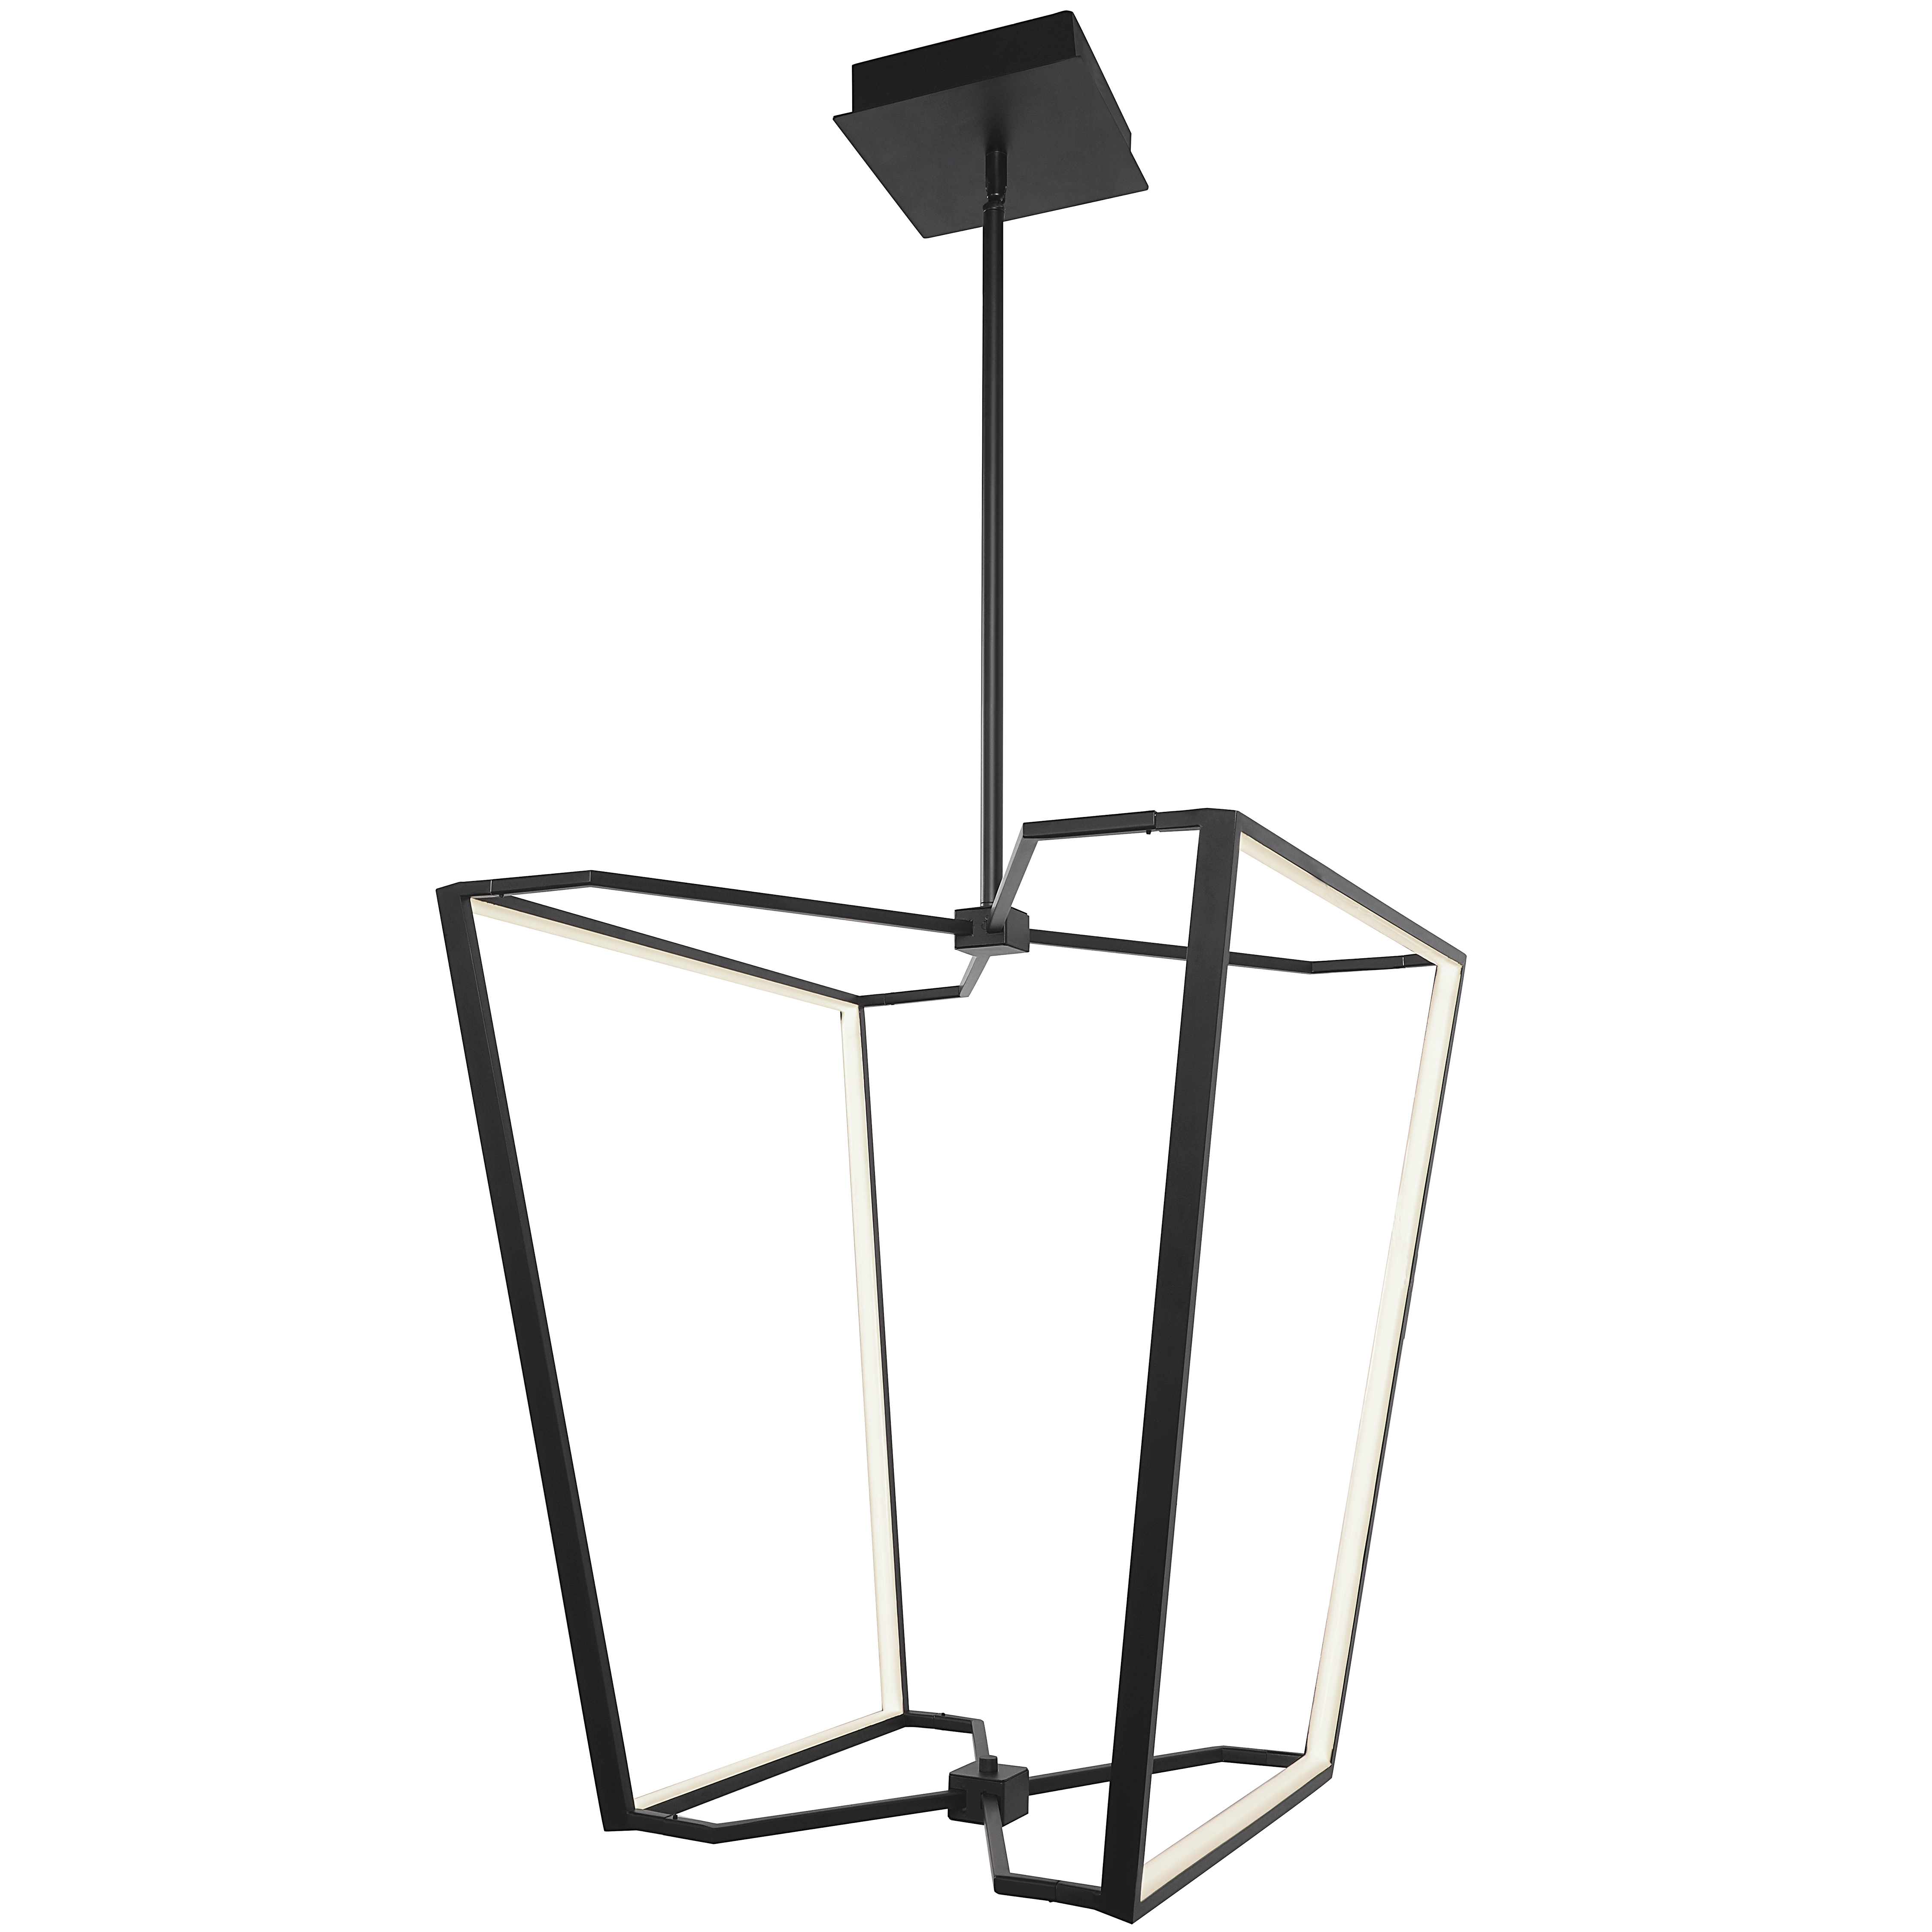 An unusual silhouette draws the eye to the Curant family of lighting. A modernist shape with a relatively small footprint makes it suitable for main areas such as the living or dining rooms, or a hallways that you'd like to accent.  The unique and airy open frame is crafted in metal in a choice of finish, with a white silicone diffuser along the inside edge to create soft ambient lighting.  The design is eye-catching in a minimalist mode that won't compete with furnishings or your overall design scheme.